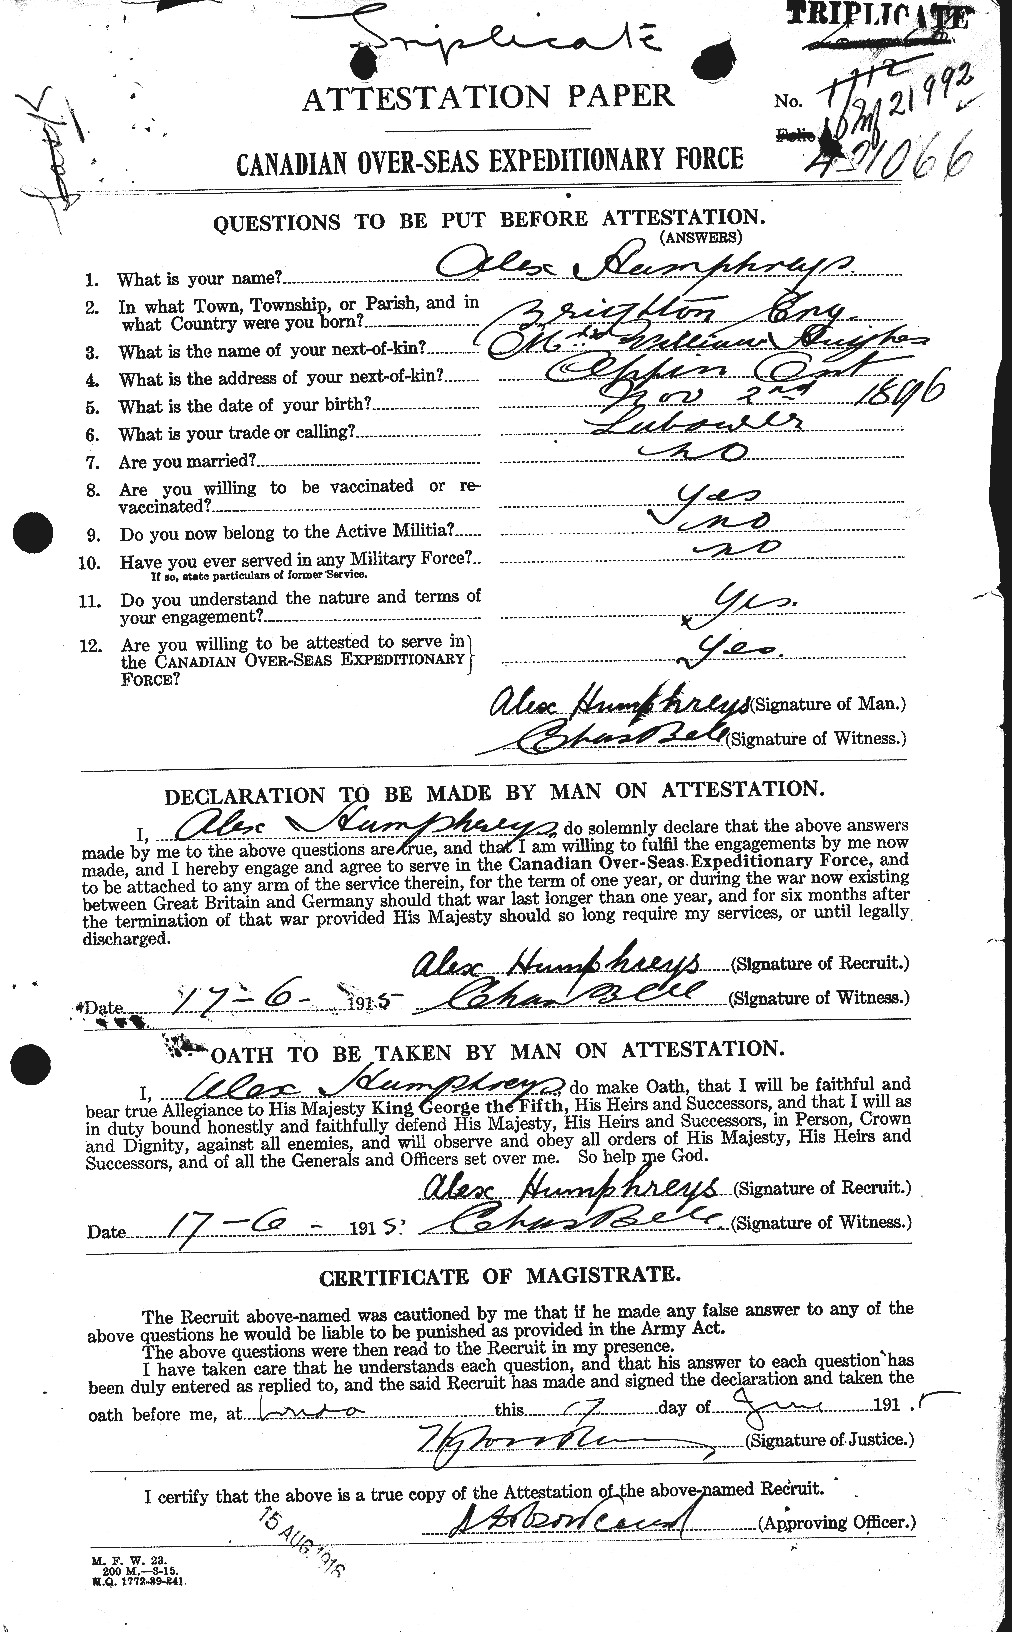 Personnel Records of the First World War - CEF 409465a